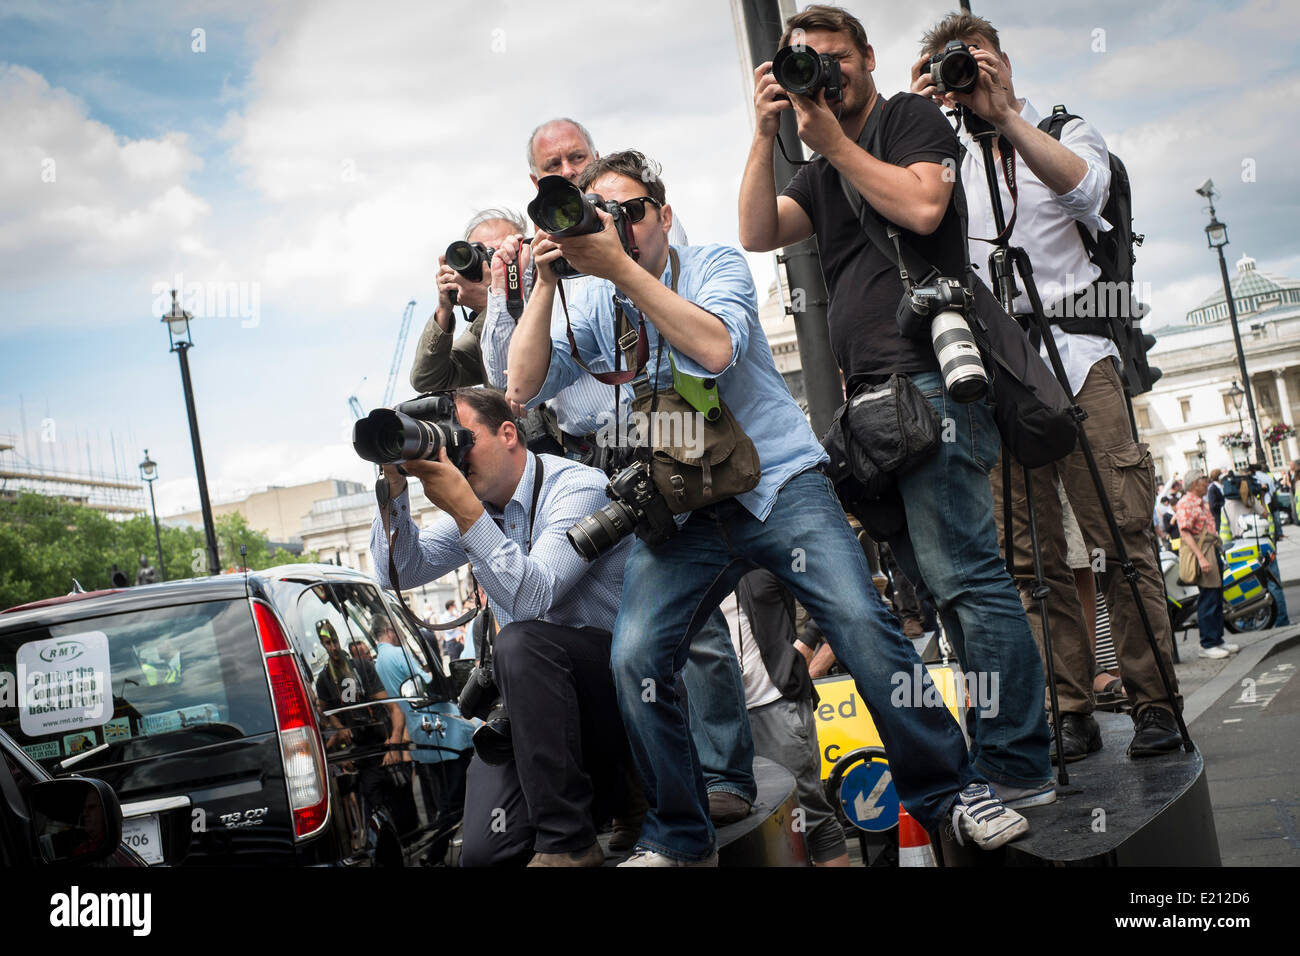 Press photographers at work in Whitehall during the London Taxi strike over the Uber mobile App.  Thousands of London's Black Cabs  brought parts of central London to a standstill. Whitehall, Central London, 11th June 2014 Stock Photo